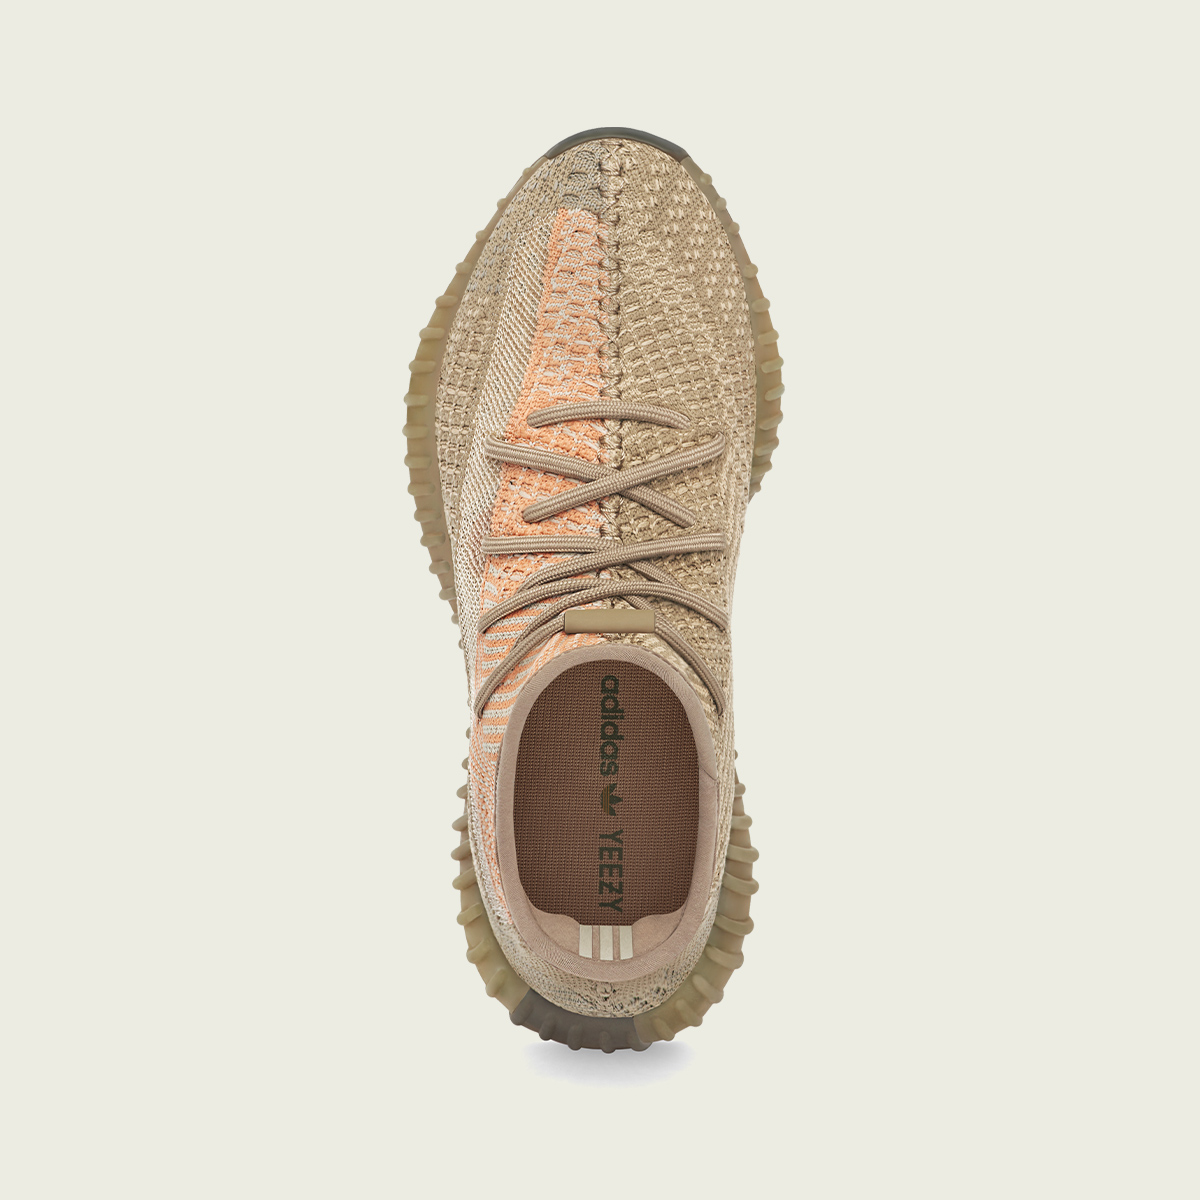 YEEZY BOOST 350 V2 SAND TAUPE Top Social IG 1200×1200